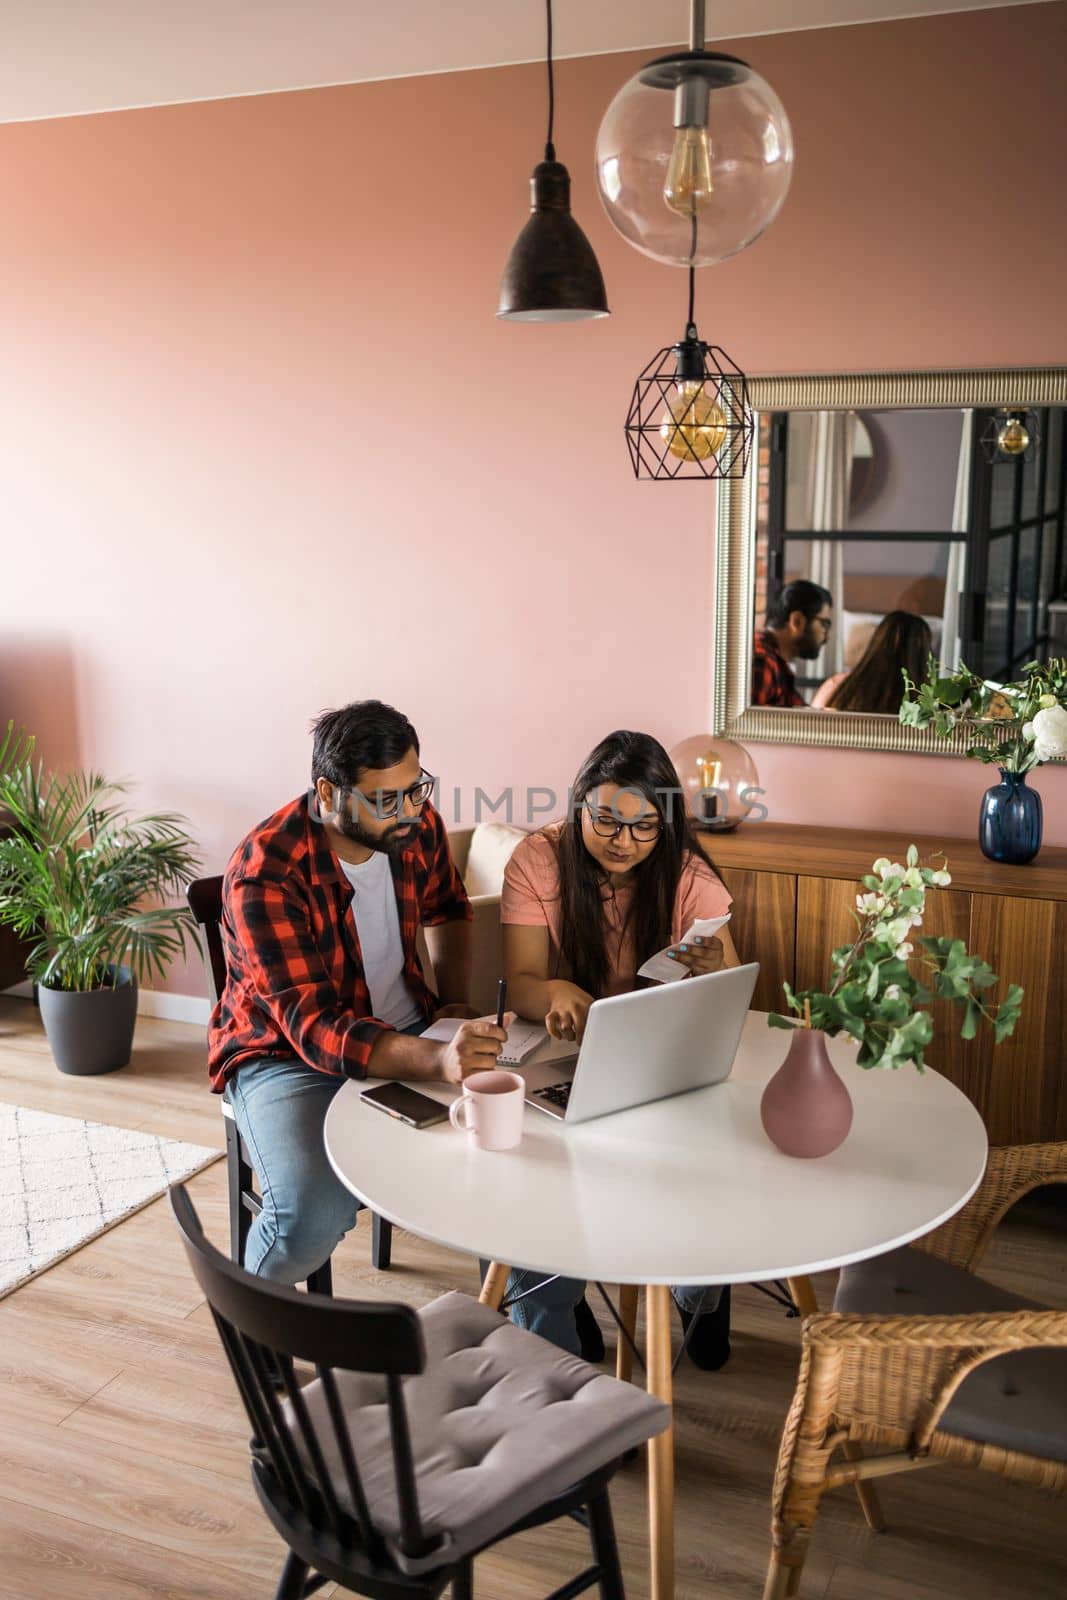 Serious wife and husband planning budget, checking finances, focused young woman using online calculator, counting bills or taxes, man using laptop, online banking services. Family sitting at table in kitchen - economic crisis concept